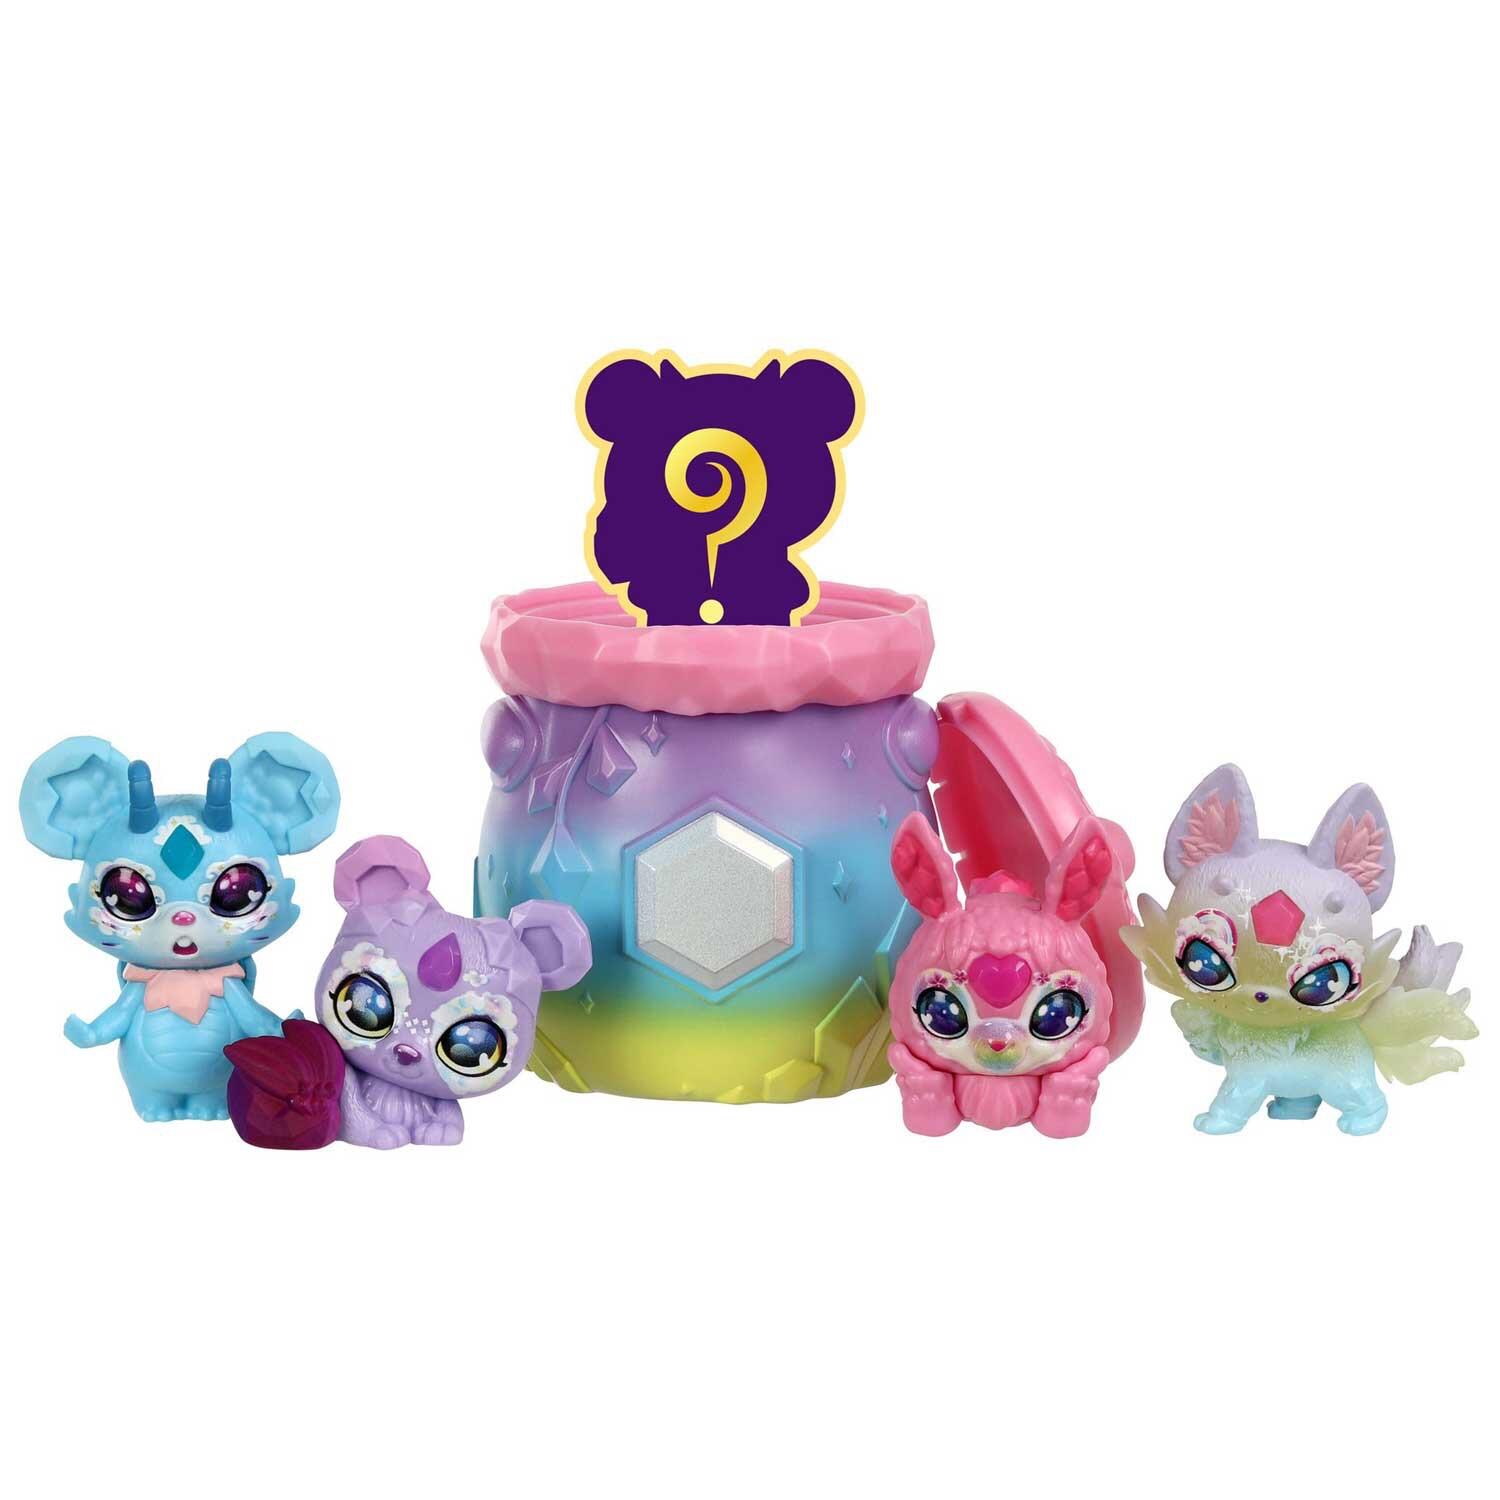 Magic Mixies Mixlings The Crystal Woods 5 Figure Pack